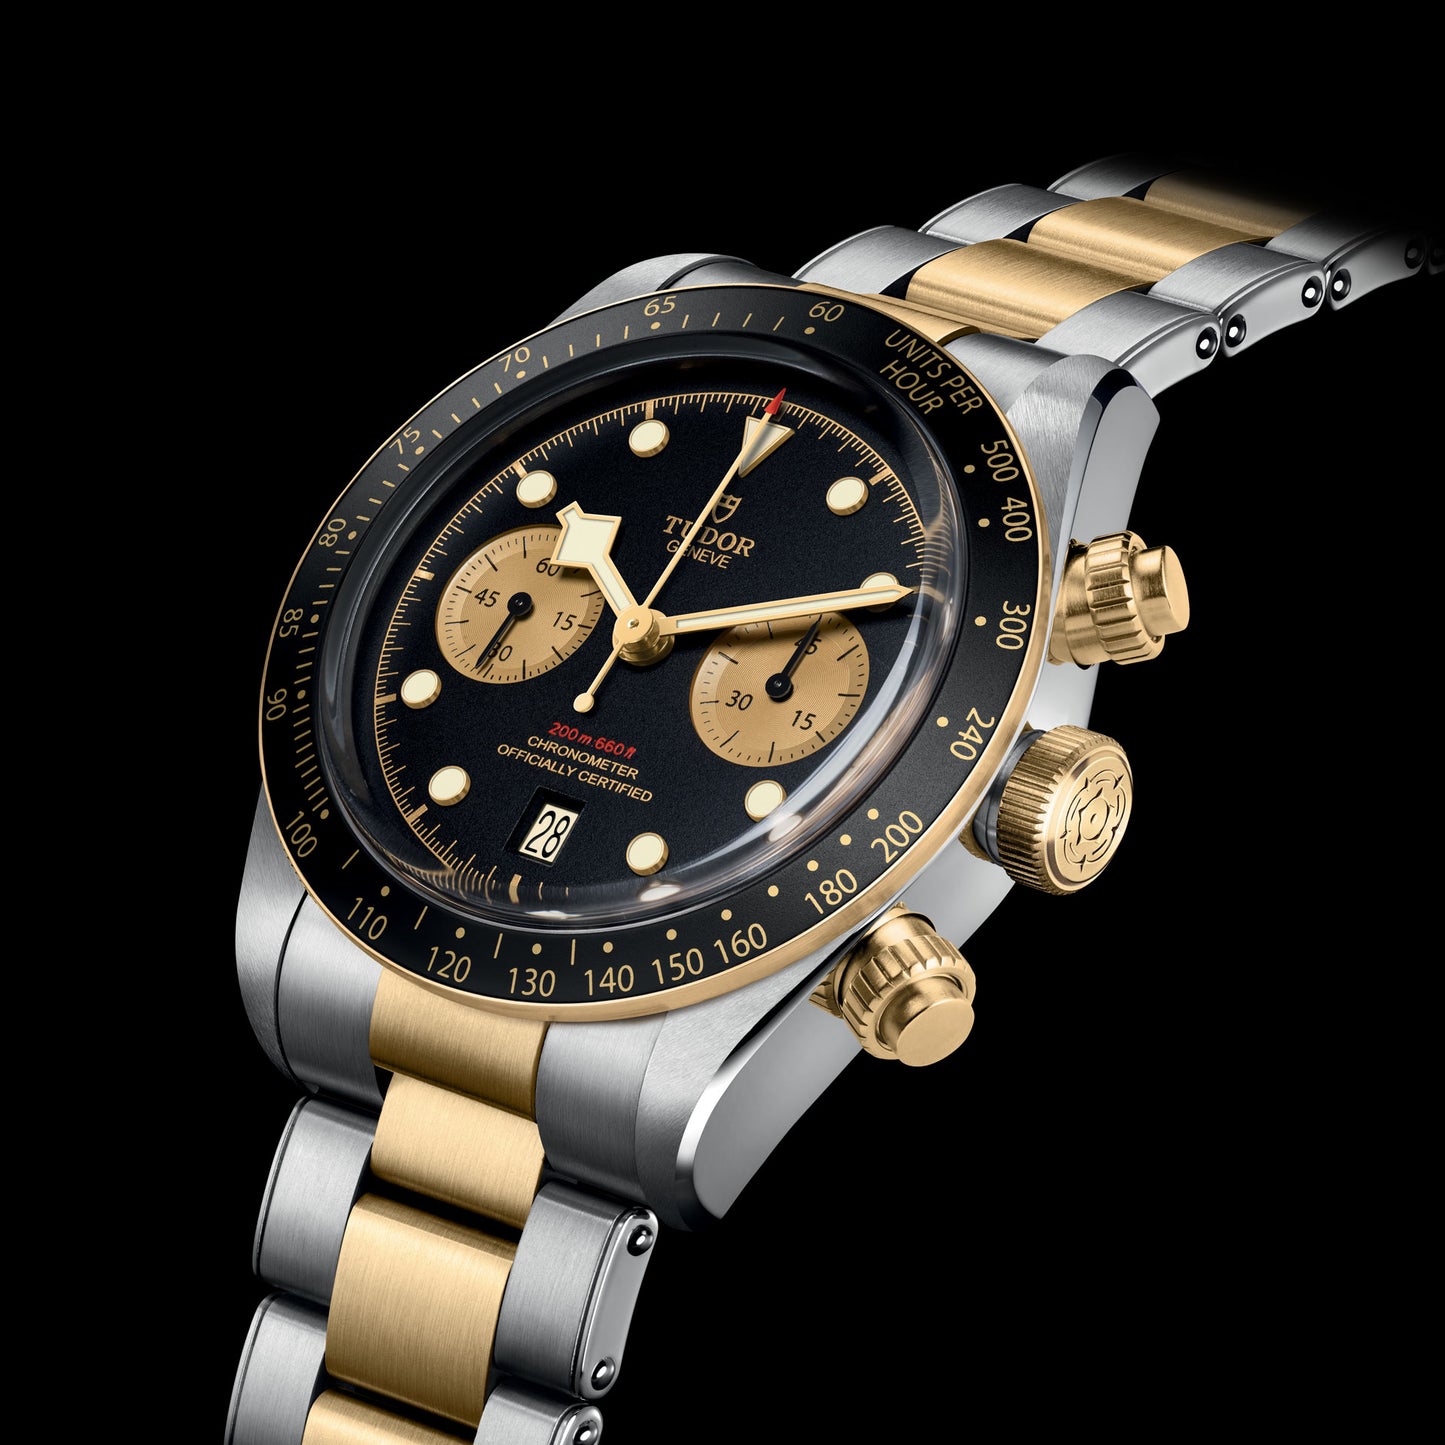 Tudor Black Bay Chrono S&G, 41mm, Stainless Steel and 18k Yellow Gold, Ref# M79363N-0001, Dial